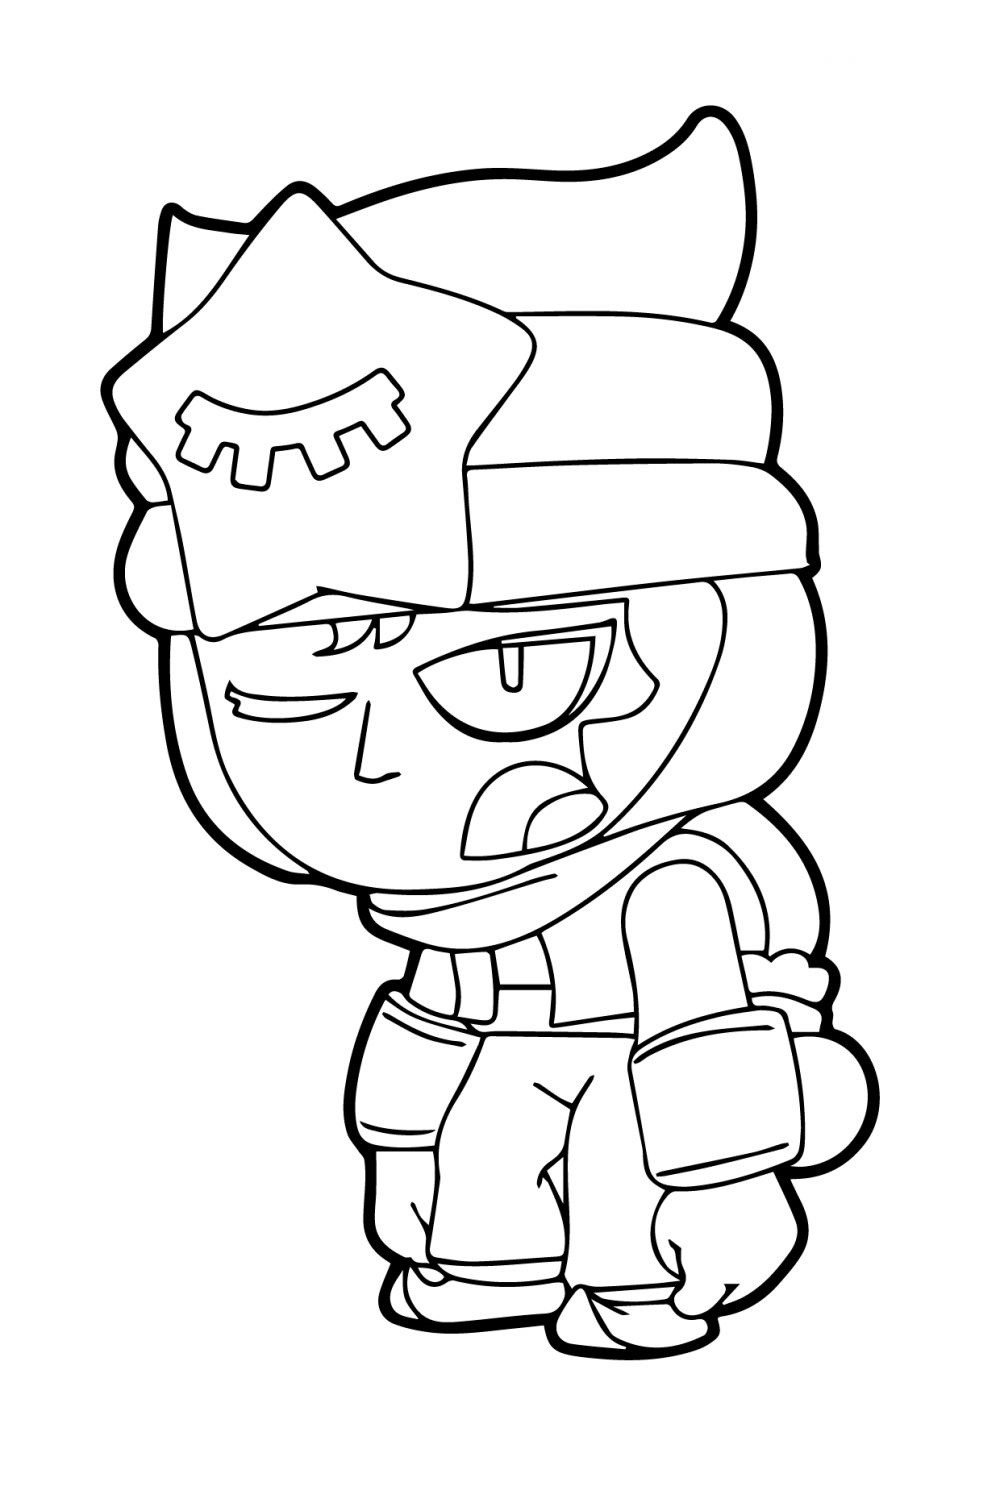 Sandy Coloring Pages Print Brawl Stars Character For Free - image a colorier super rare brawl stars